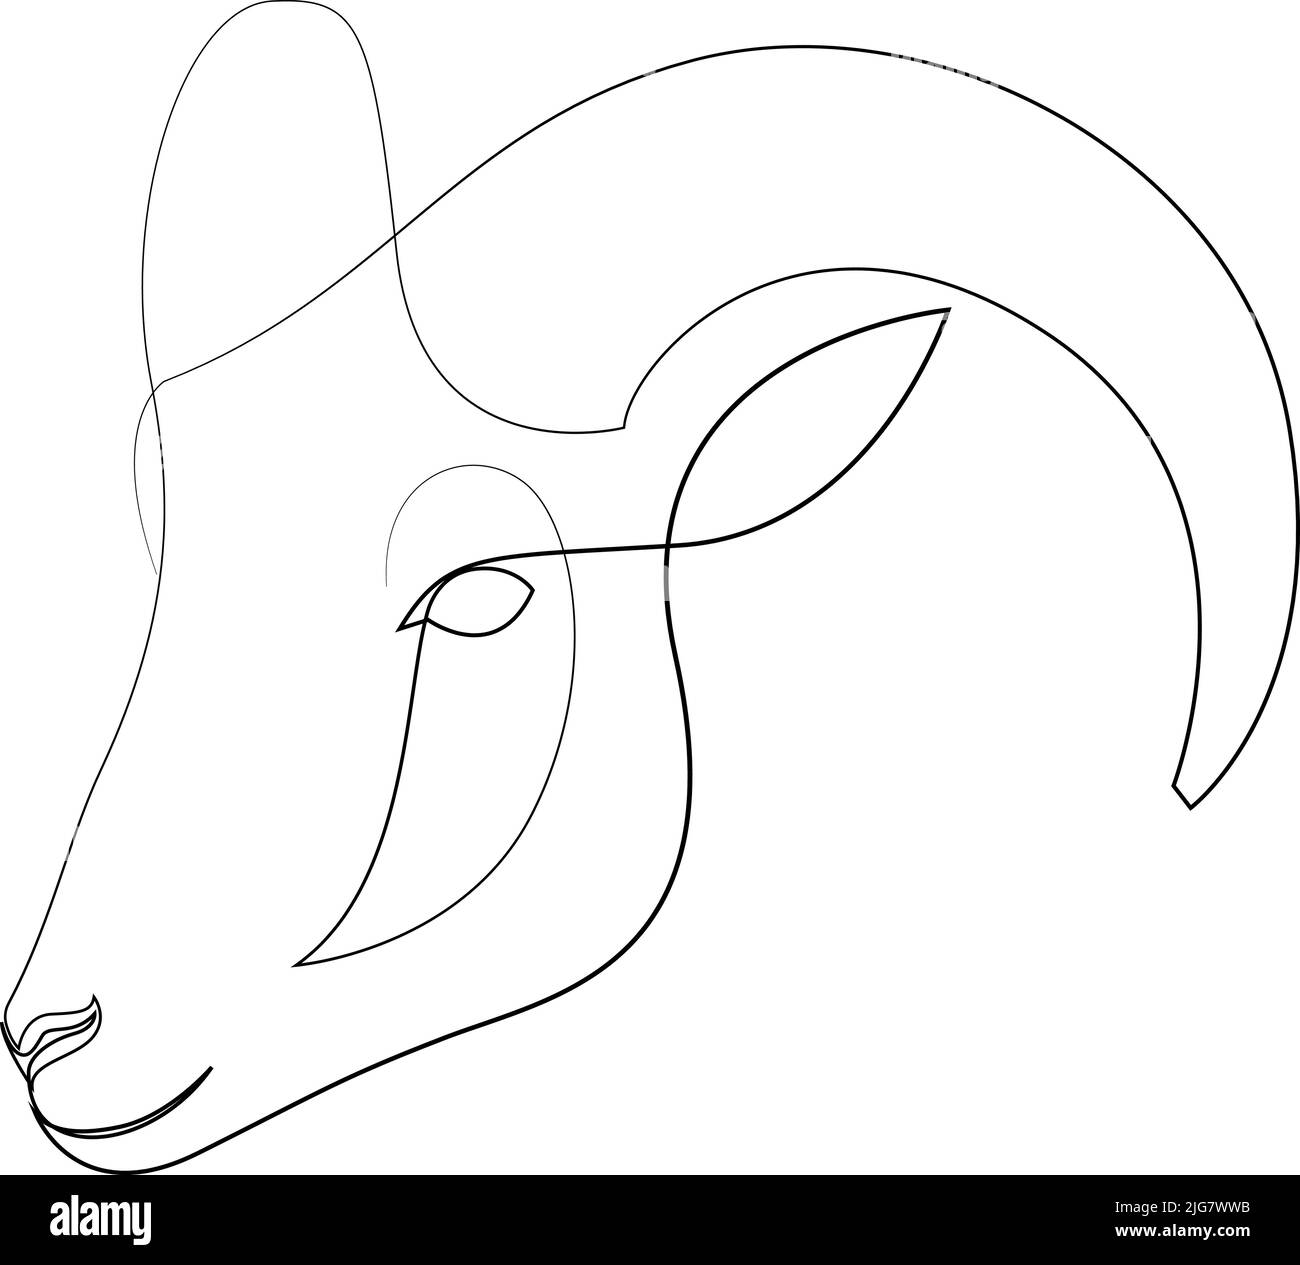 One line design silhouette of ram. Hand drawn single continuous line minimalism style. Vector illustration Stock Vector